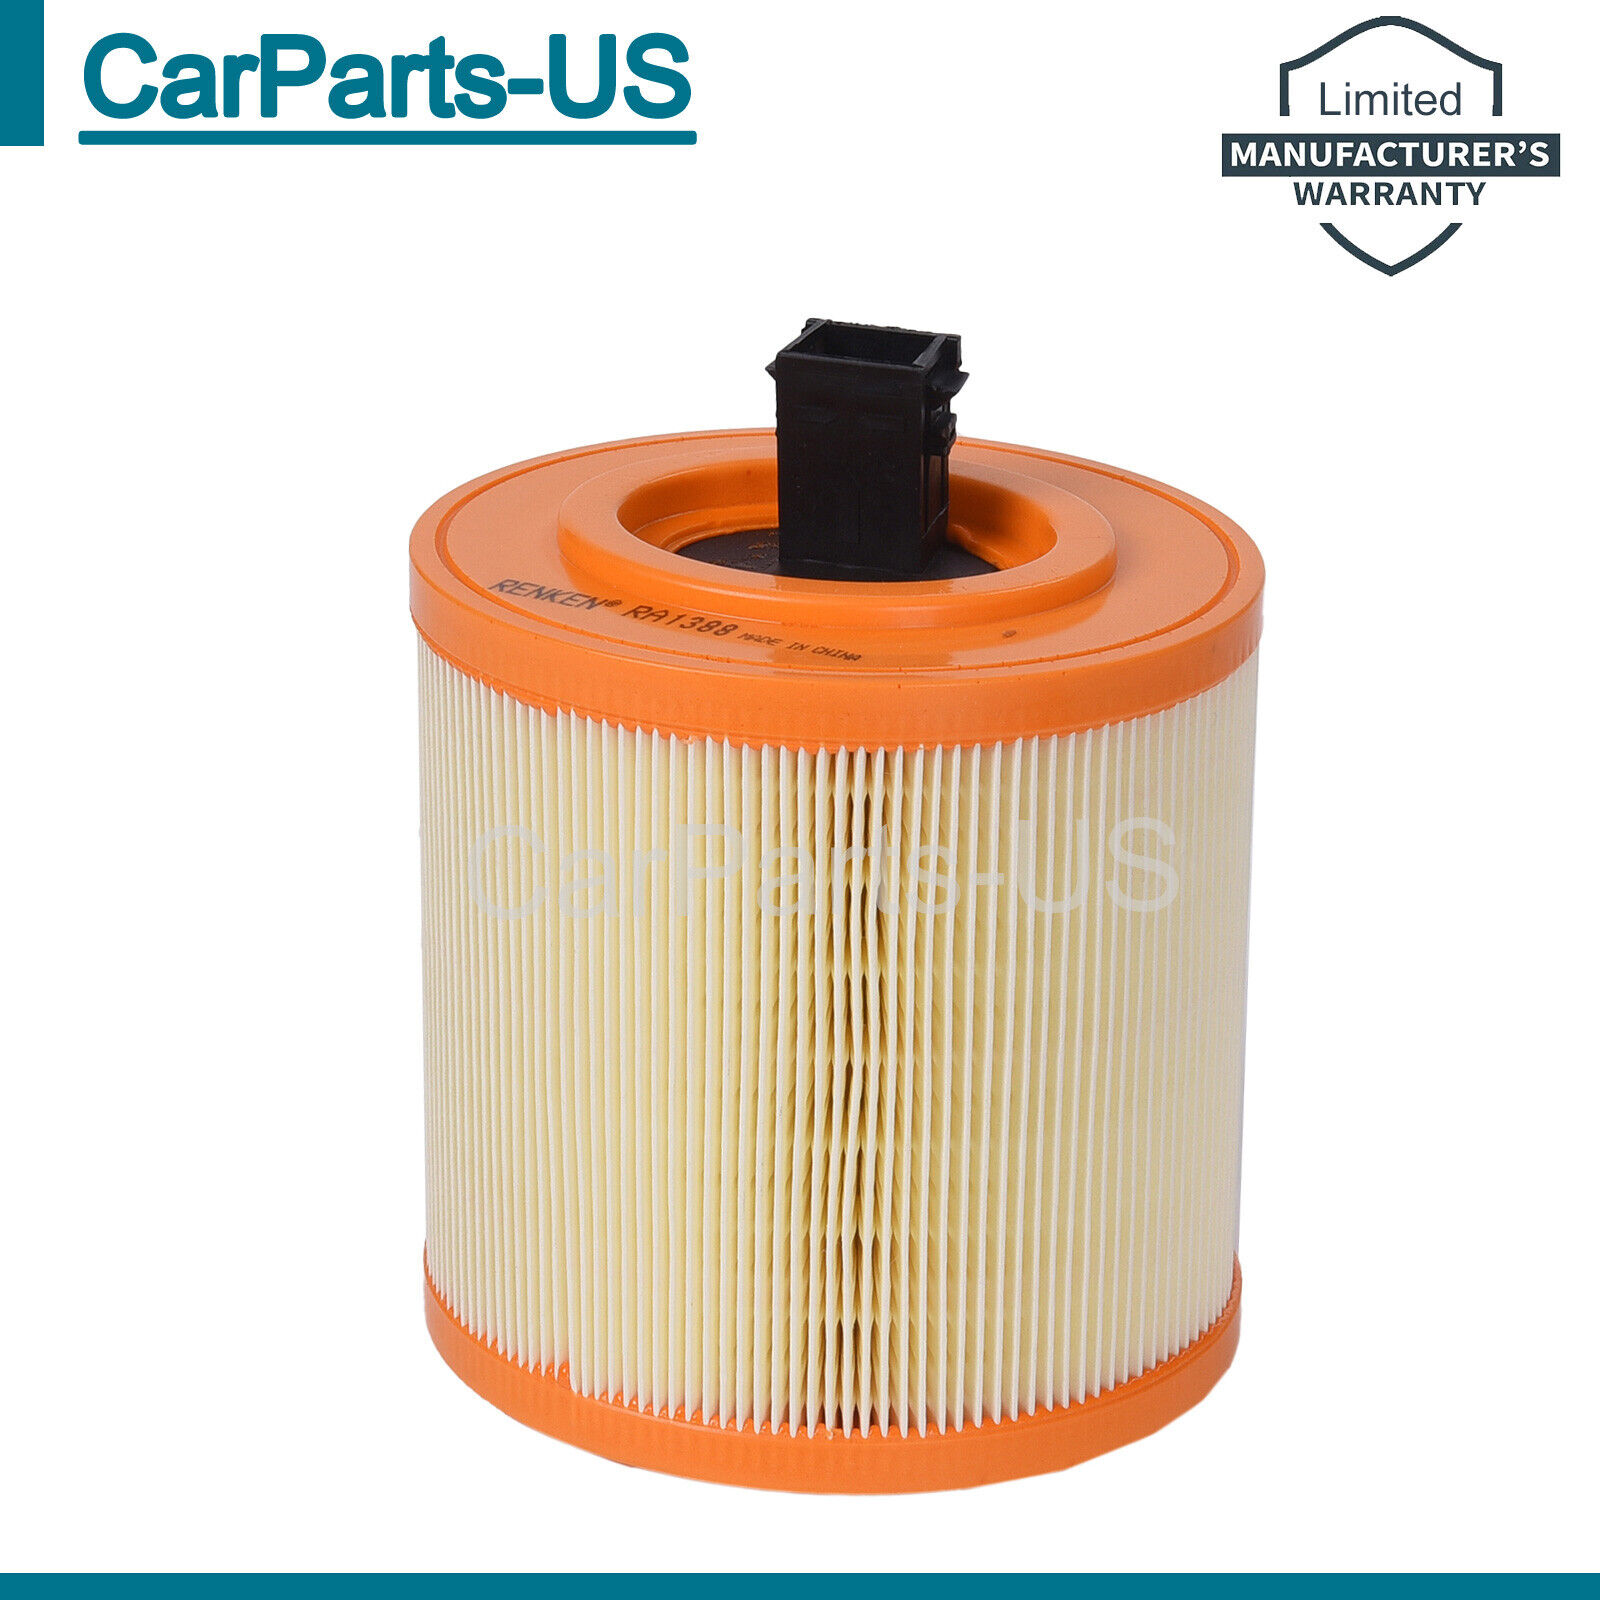 Engine Air Filter for 2016-2019 Chevy Cruze 1.4L Cadillac ATS V6 3.6L Twin-Turbo